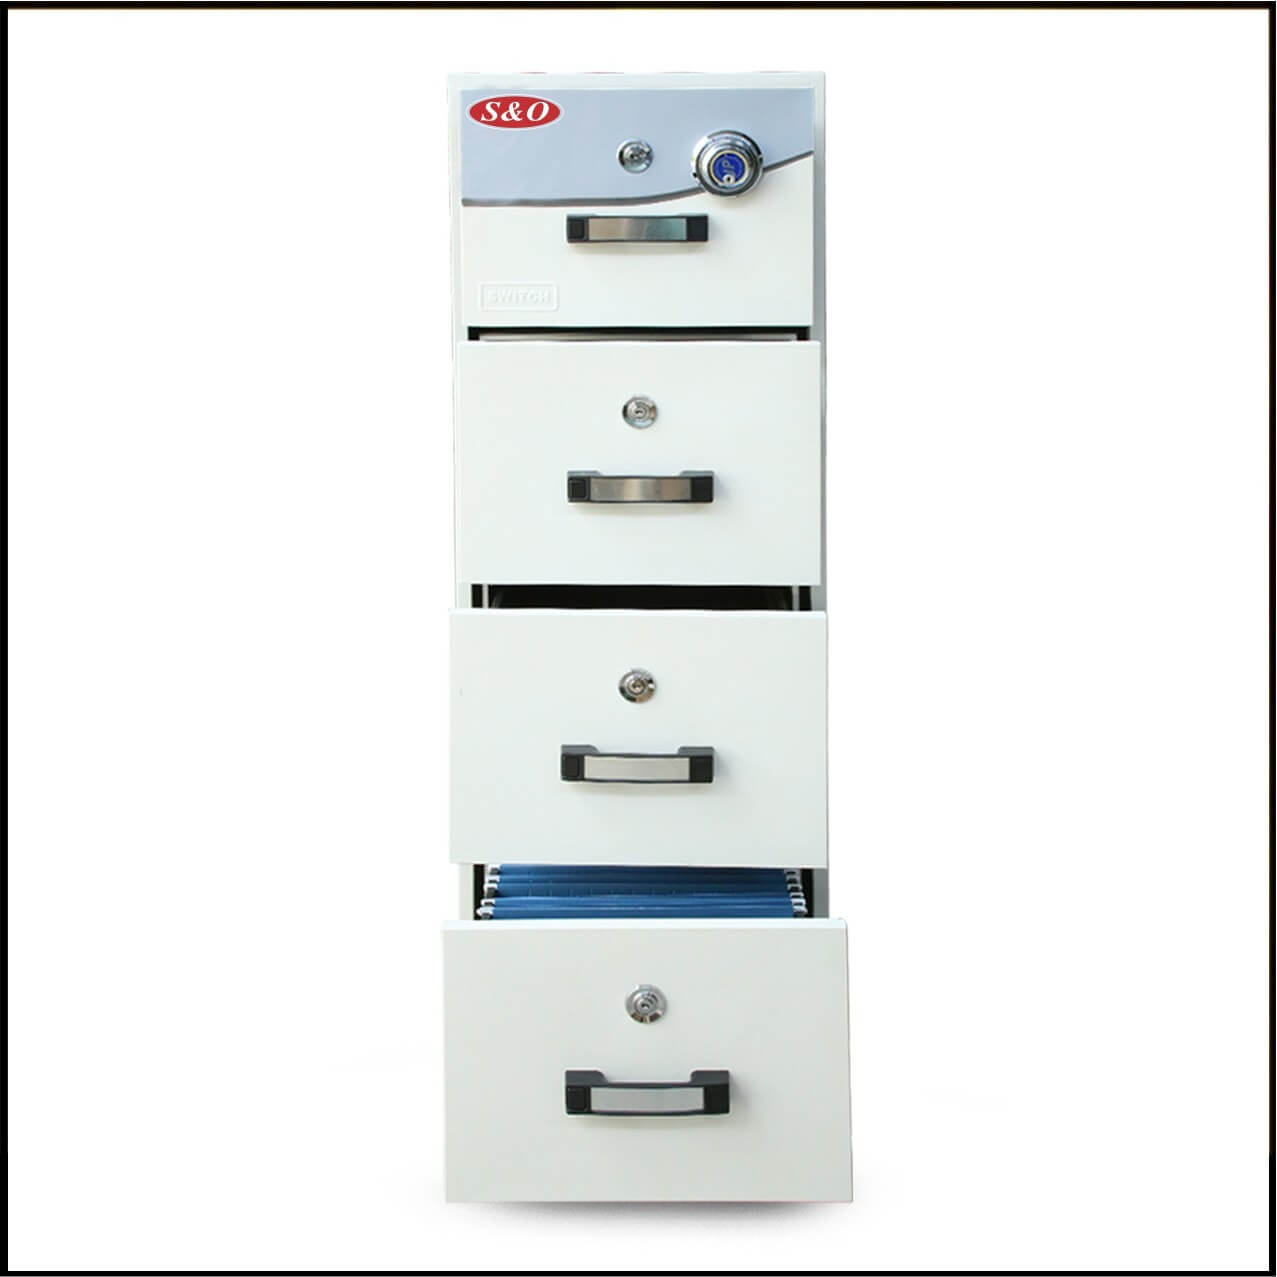 Digital Fire Proof Cabinets -On-Display-At-Safes-And-Office-Security-Systems-Ltd-Showroom-In-Nairobi-Kenya-https://safesandofficesecurity.com